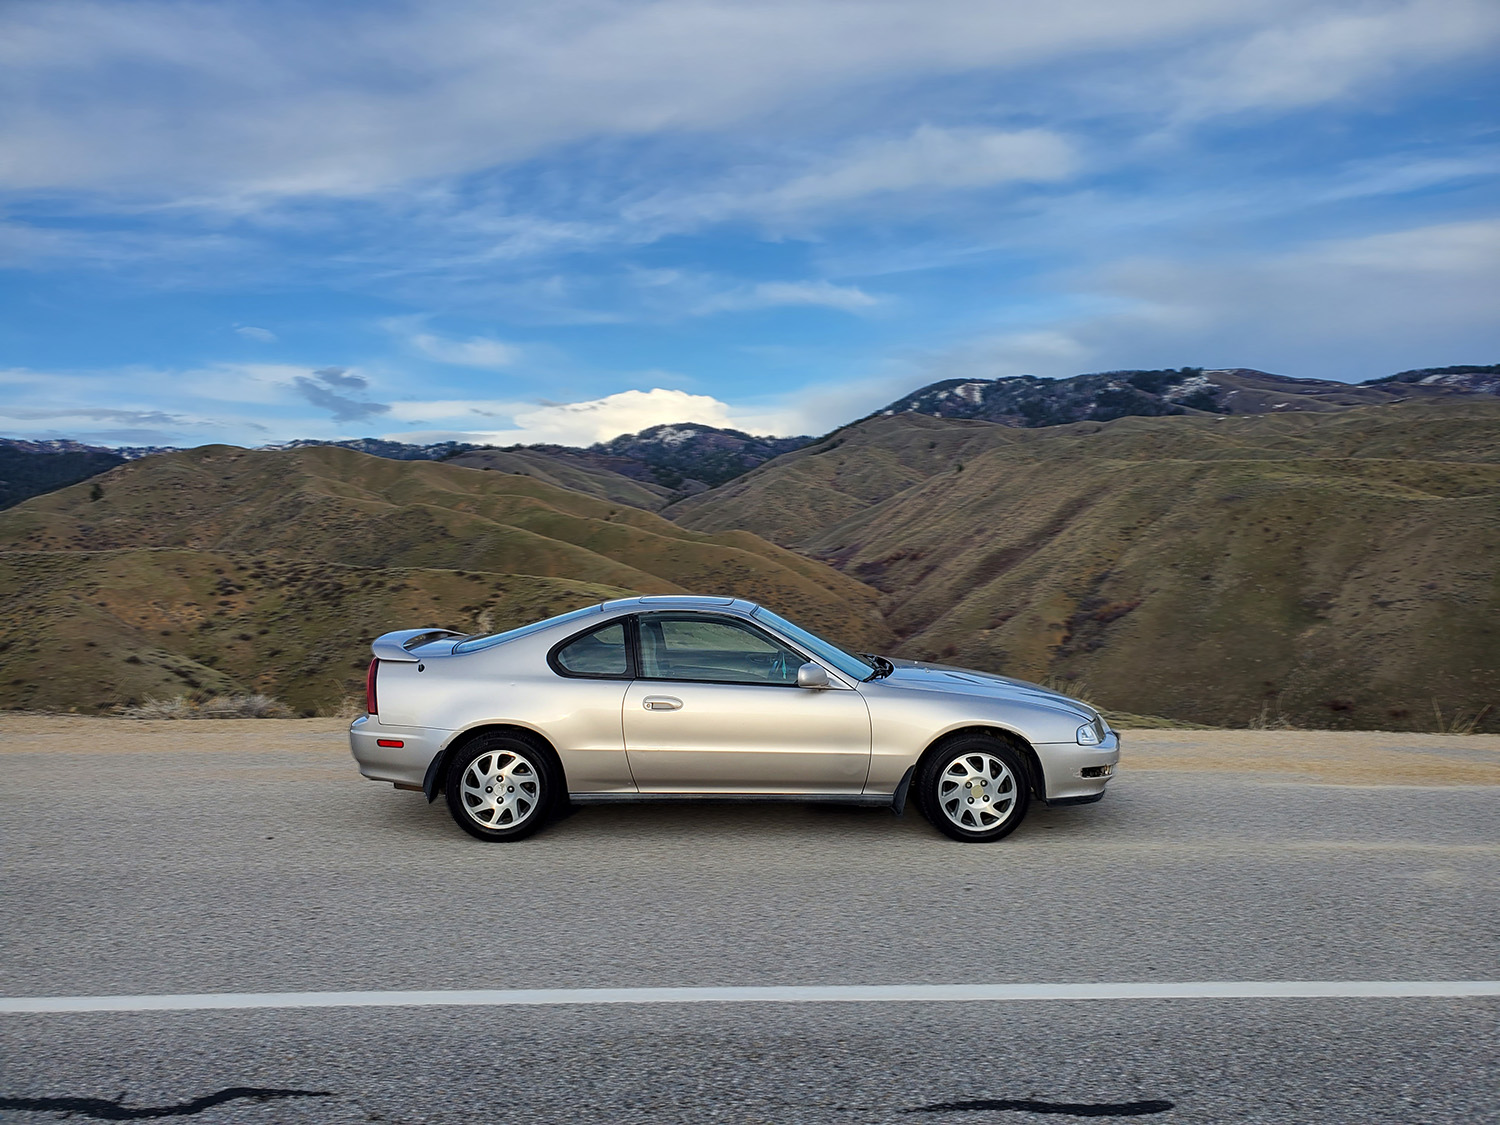 Silver 1996 Honda Prelude Si parked on mountain road with valley in background, passenger side